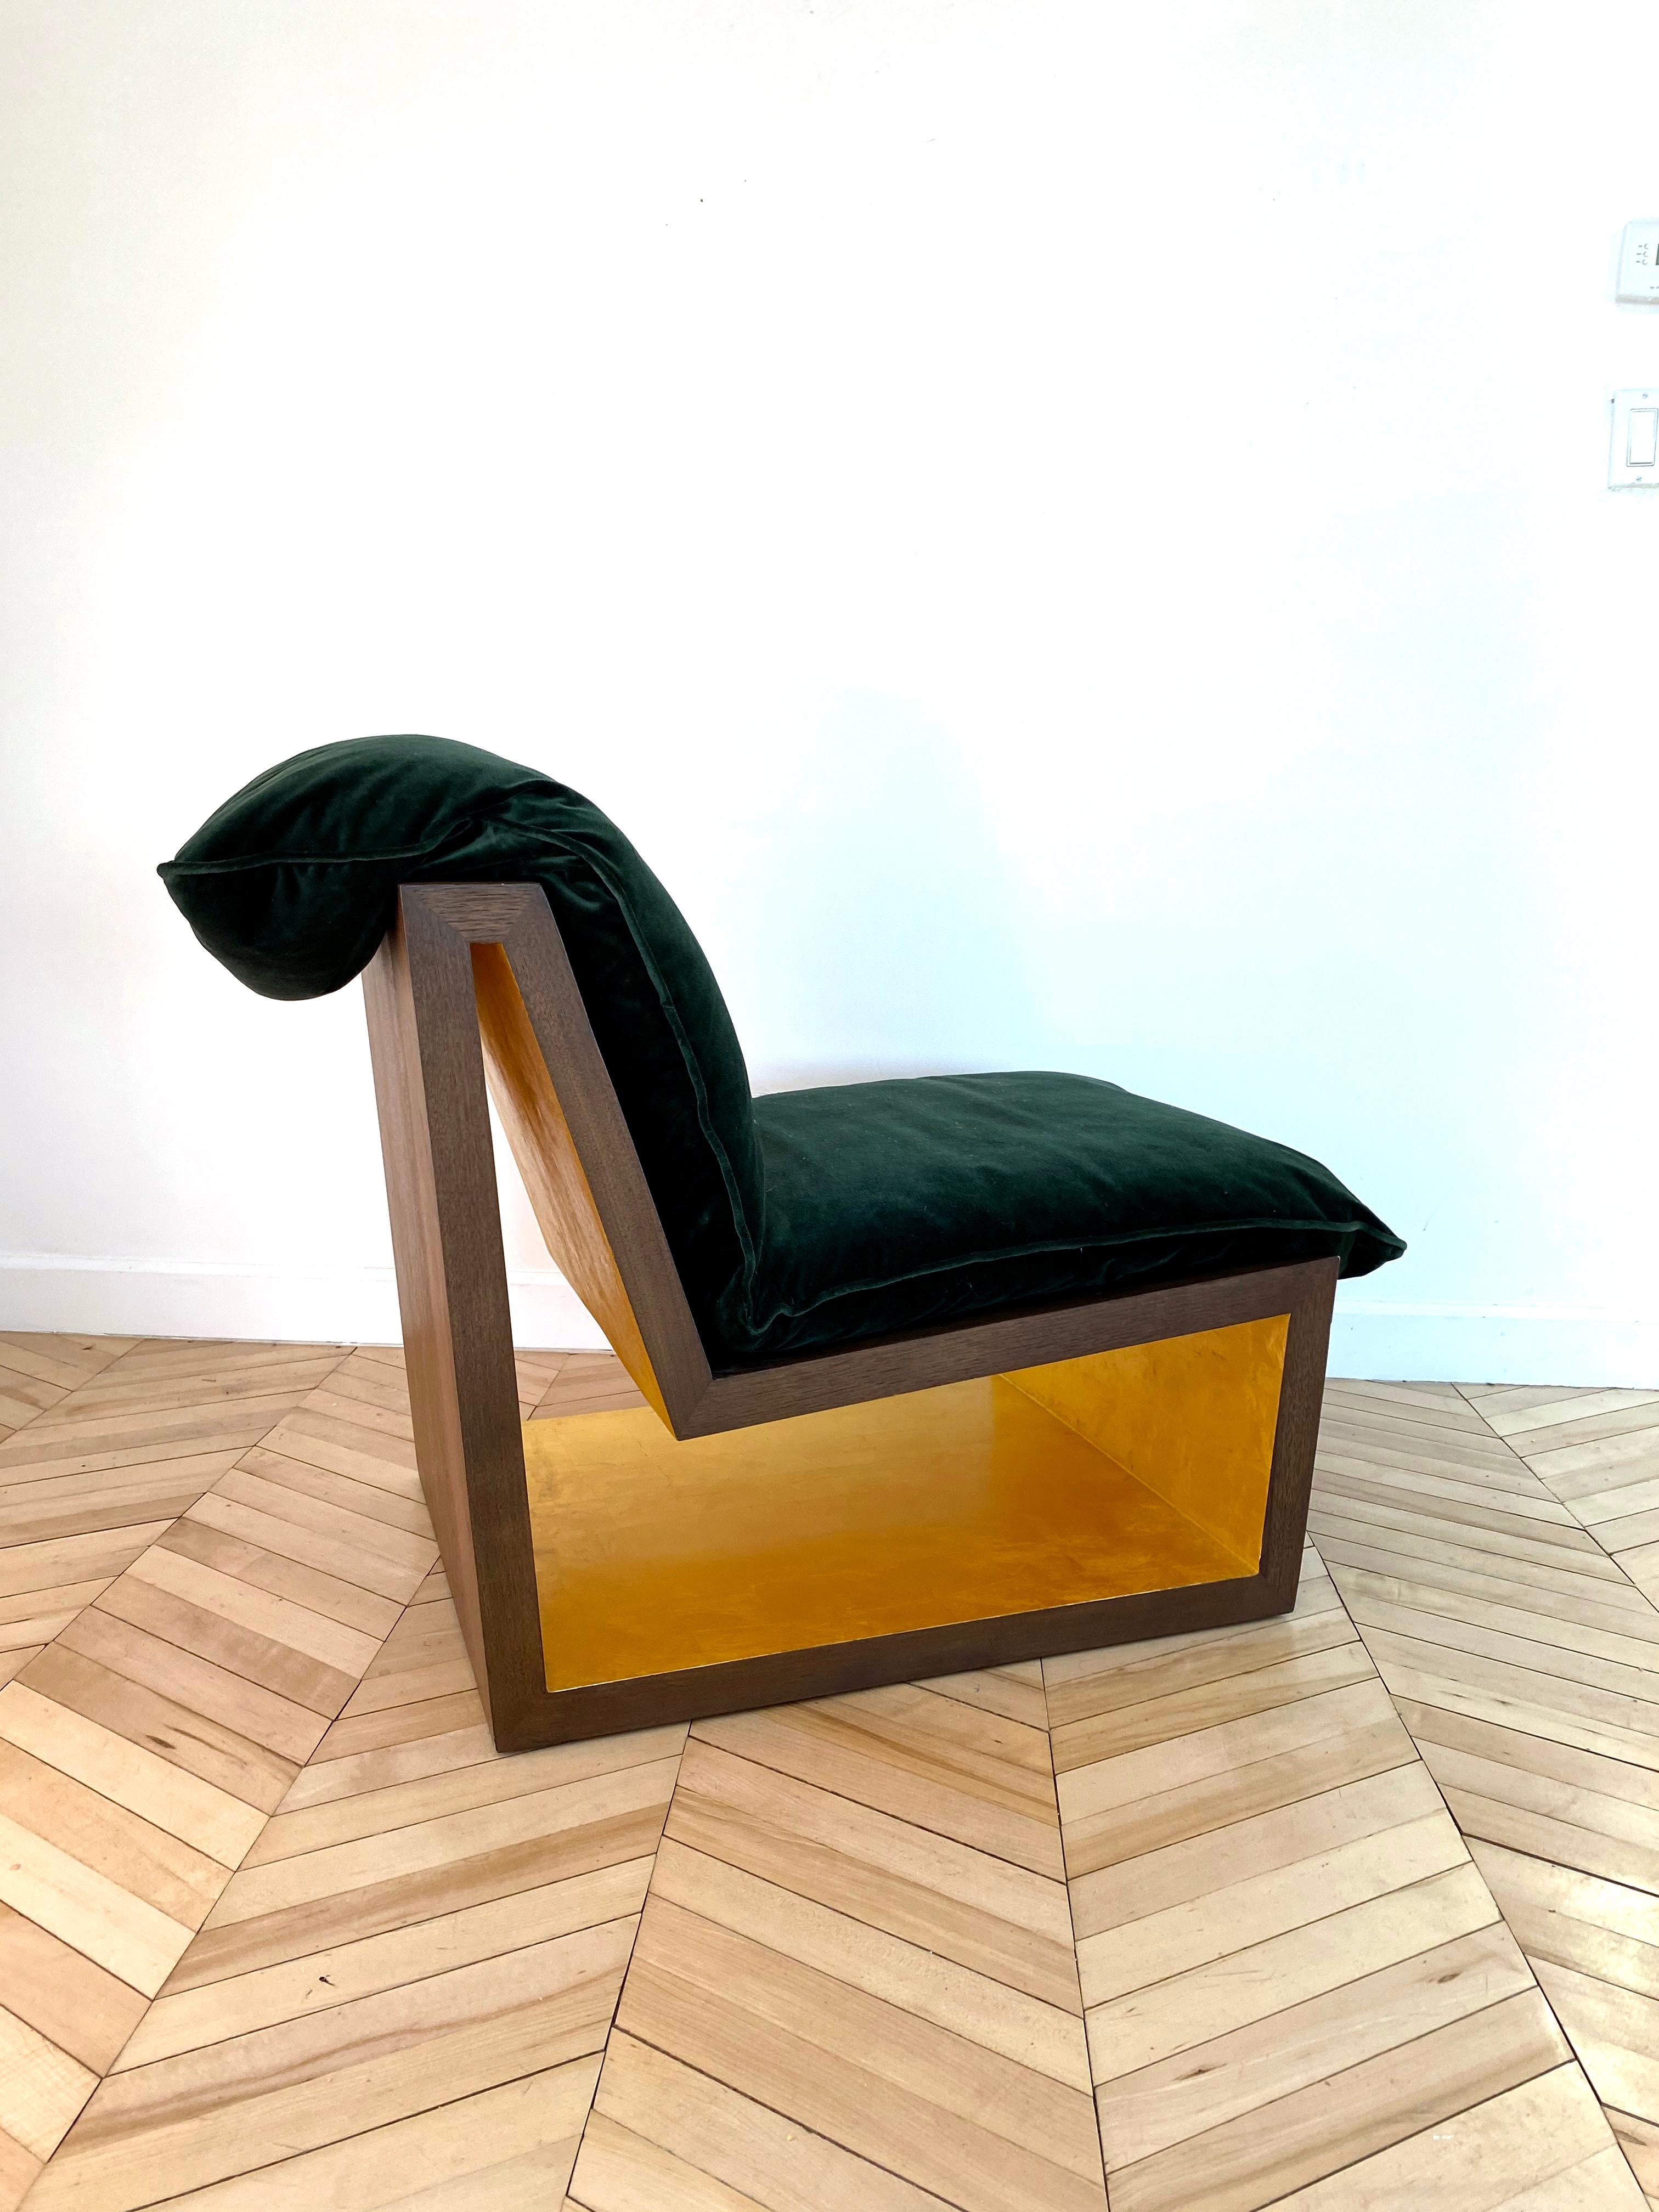 American Tucker Lounge Chair, Contemporary, Walnut and Gold Leaf, by Dean and Dahl For Sale